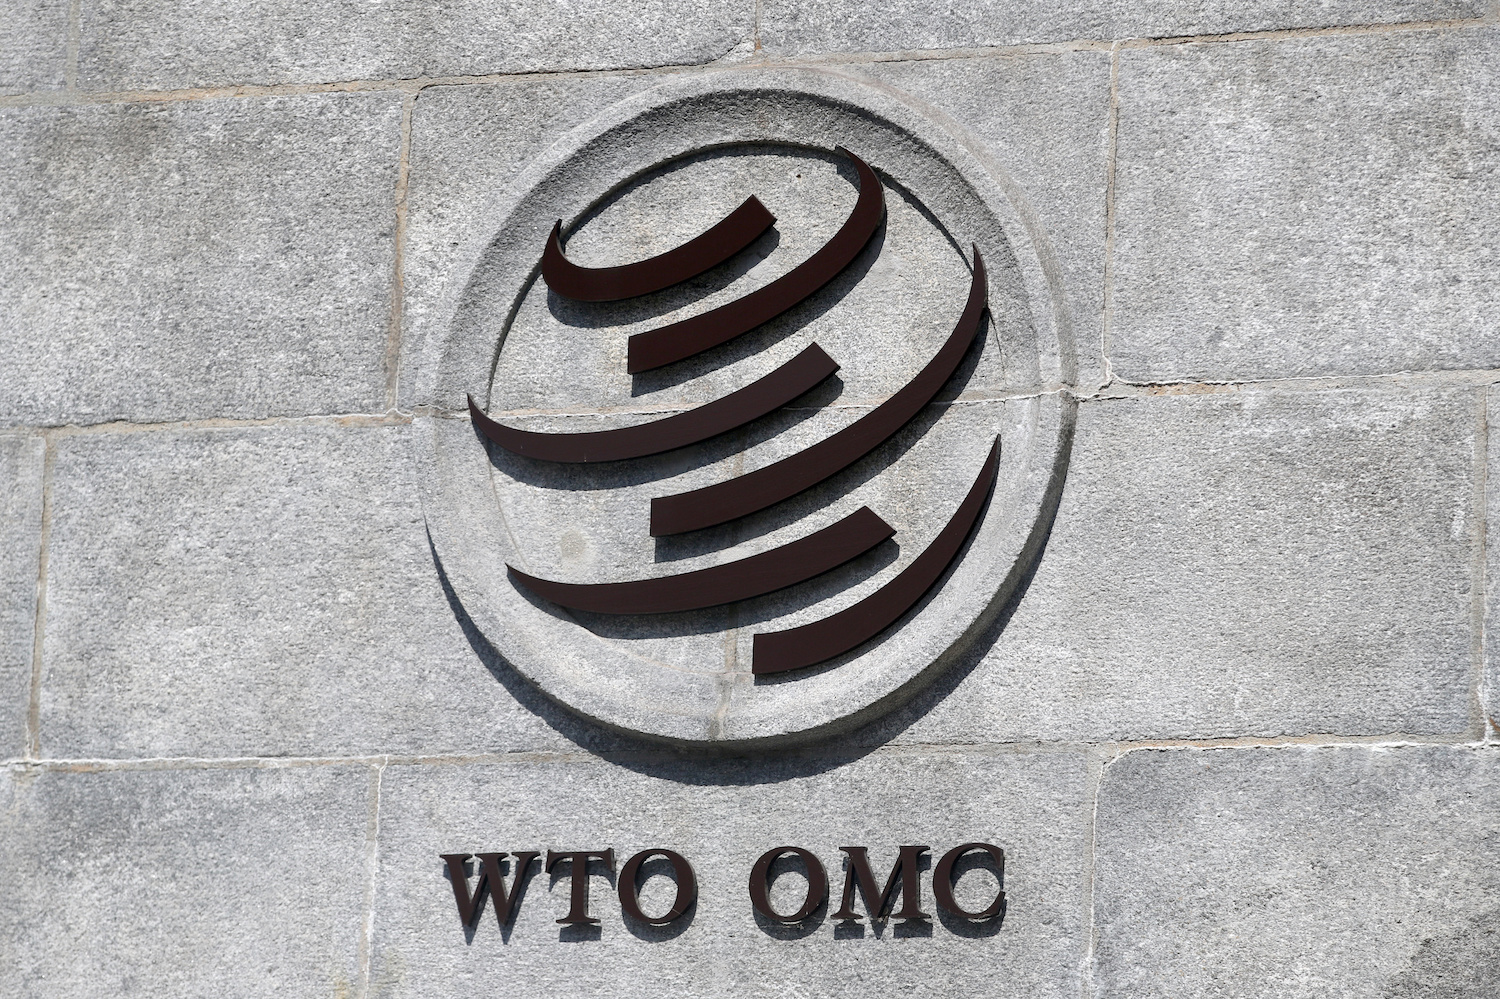 EU Files WTO Complaint Against China Over Telecom Patents